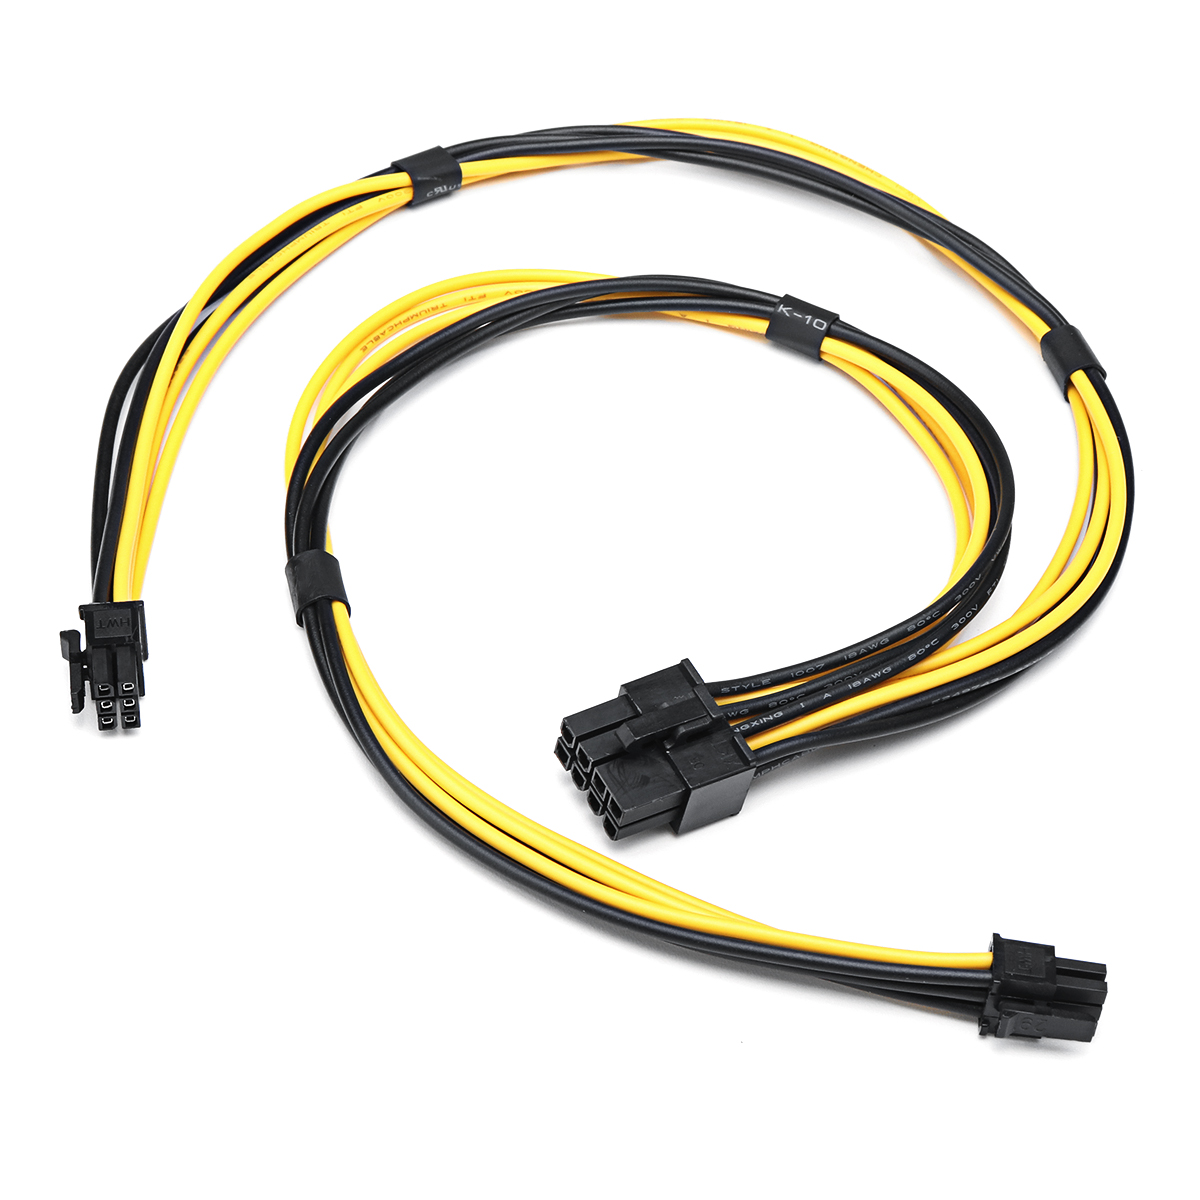 Find Dual Mini 6 Pin To 8 Pin Male PCI E Power Cable For Mac Pro Video Card for Sale on Gipsybee.com with cryptocurrencies